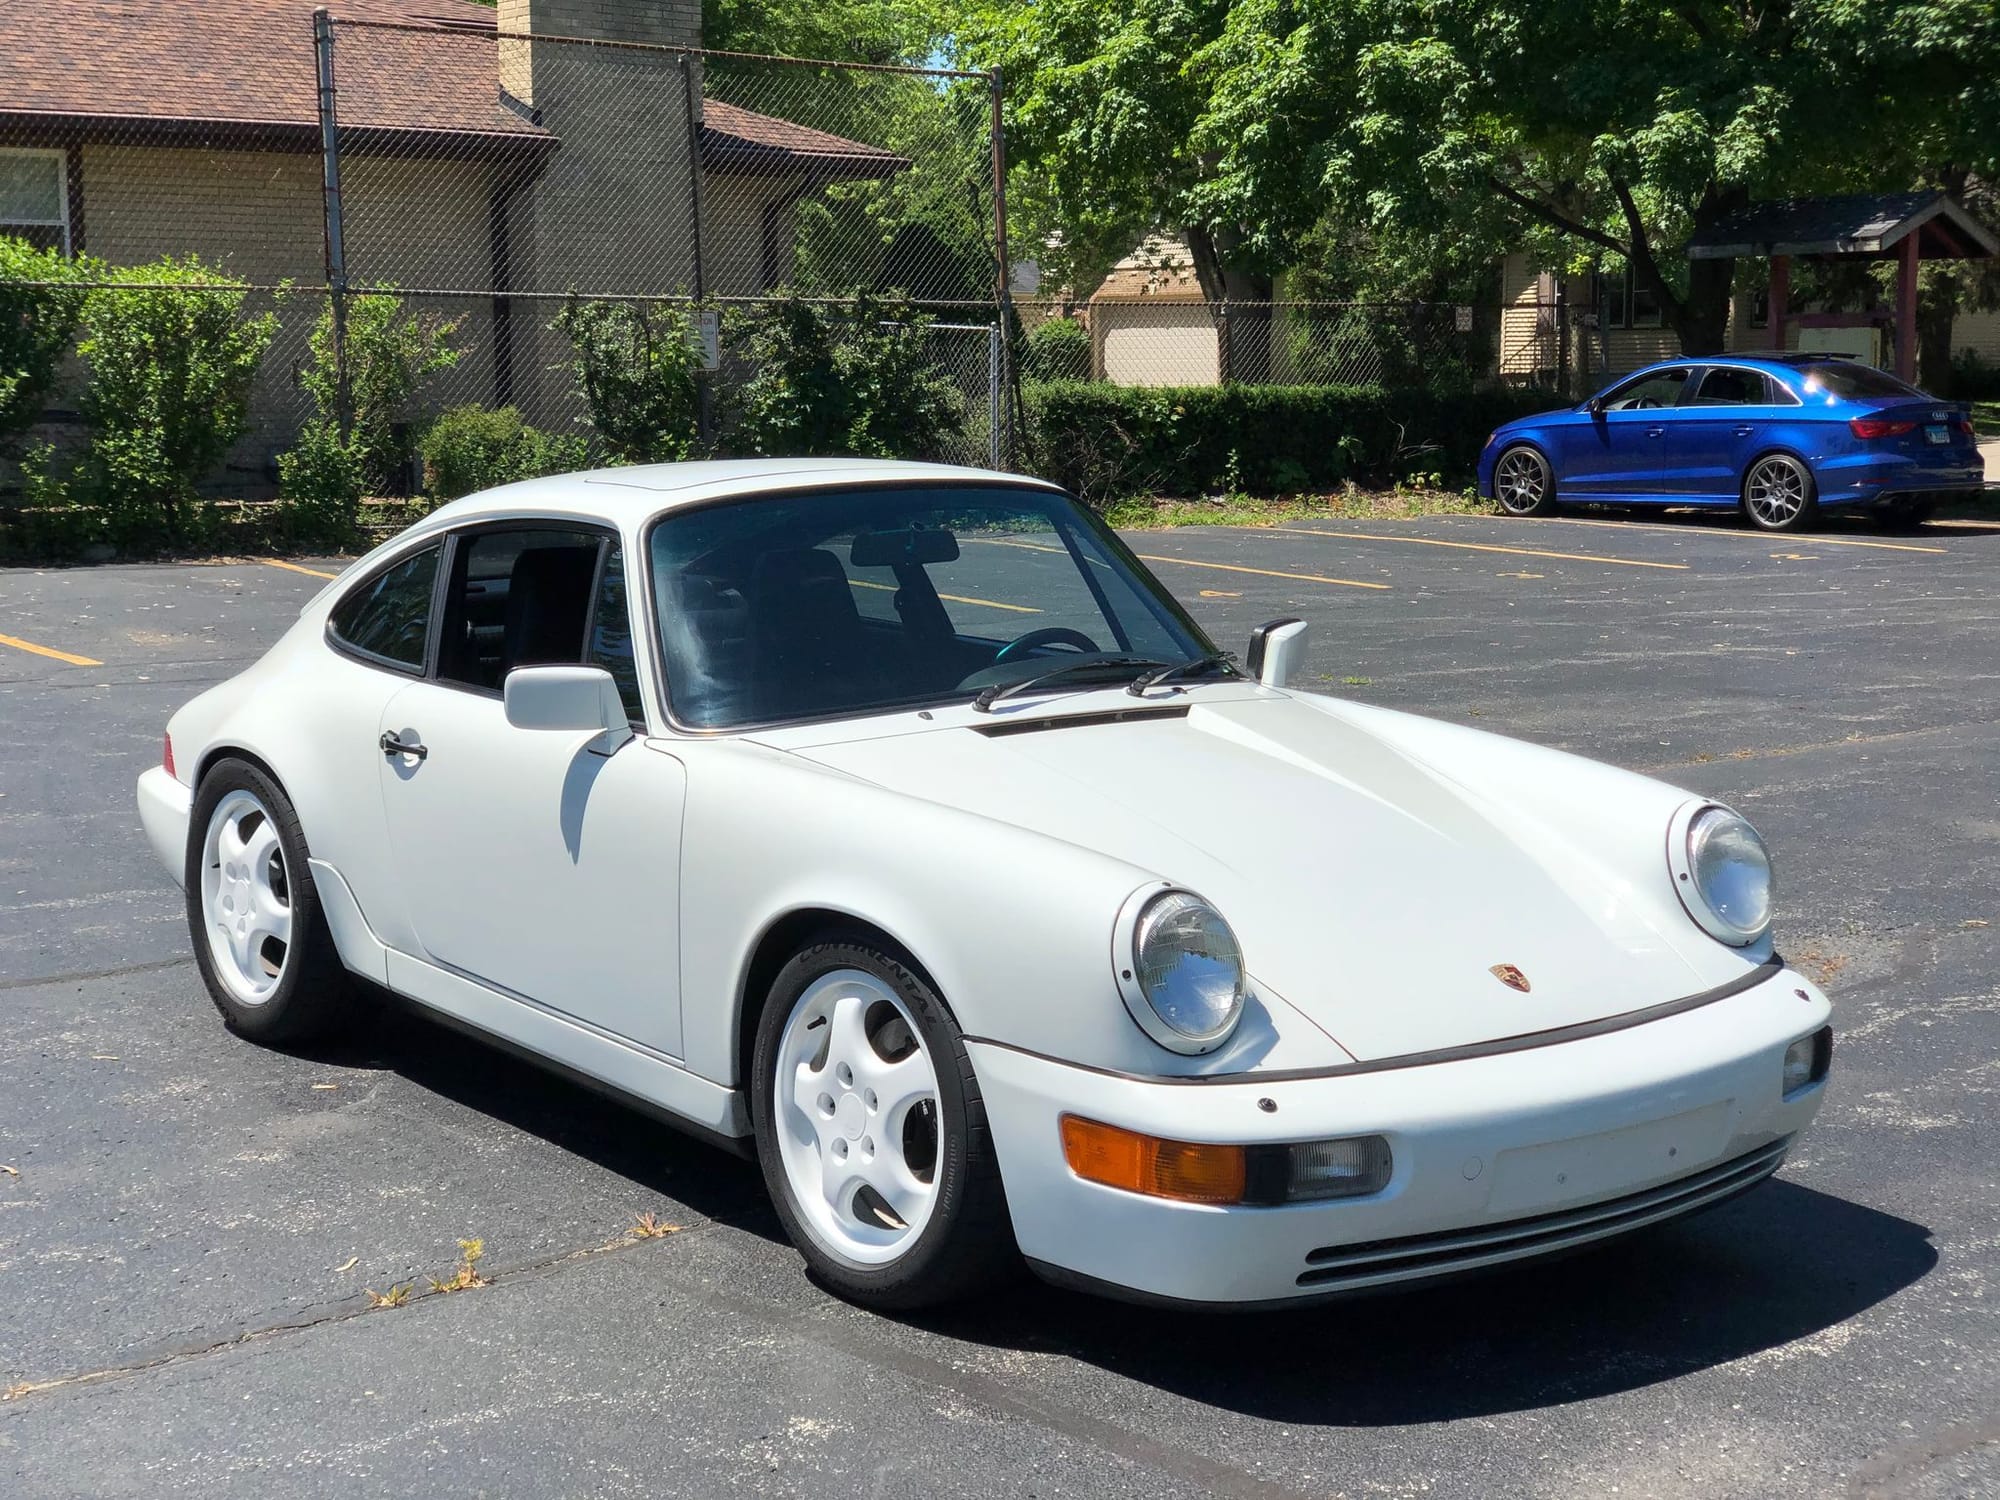 1991 Porsche 911 - 1991 Porsche 911 C2 Manual - Used - VIN WP0AB2967MS410693 - 95,100 Miles - 6 cyl - 2WD - Manual - Coupe - White - Westmont, IL 60559, United States